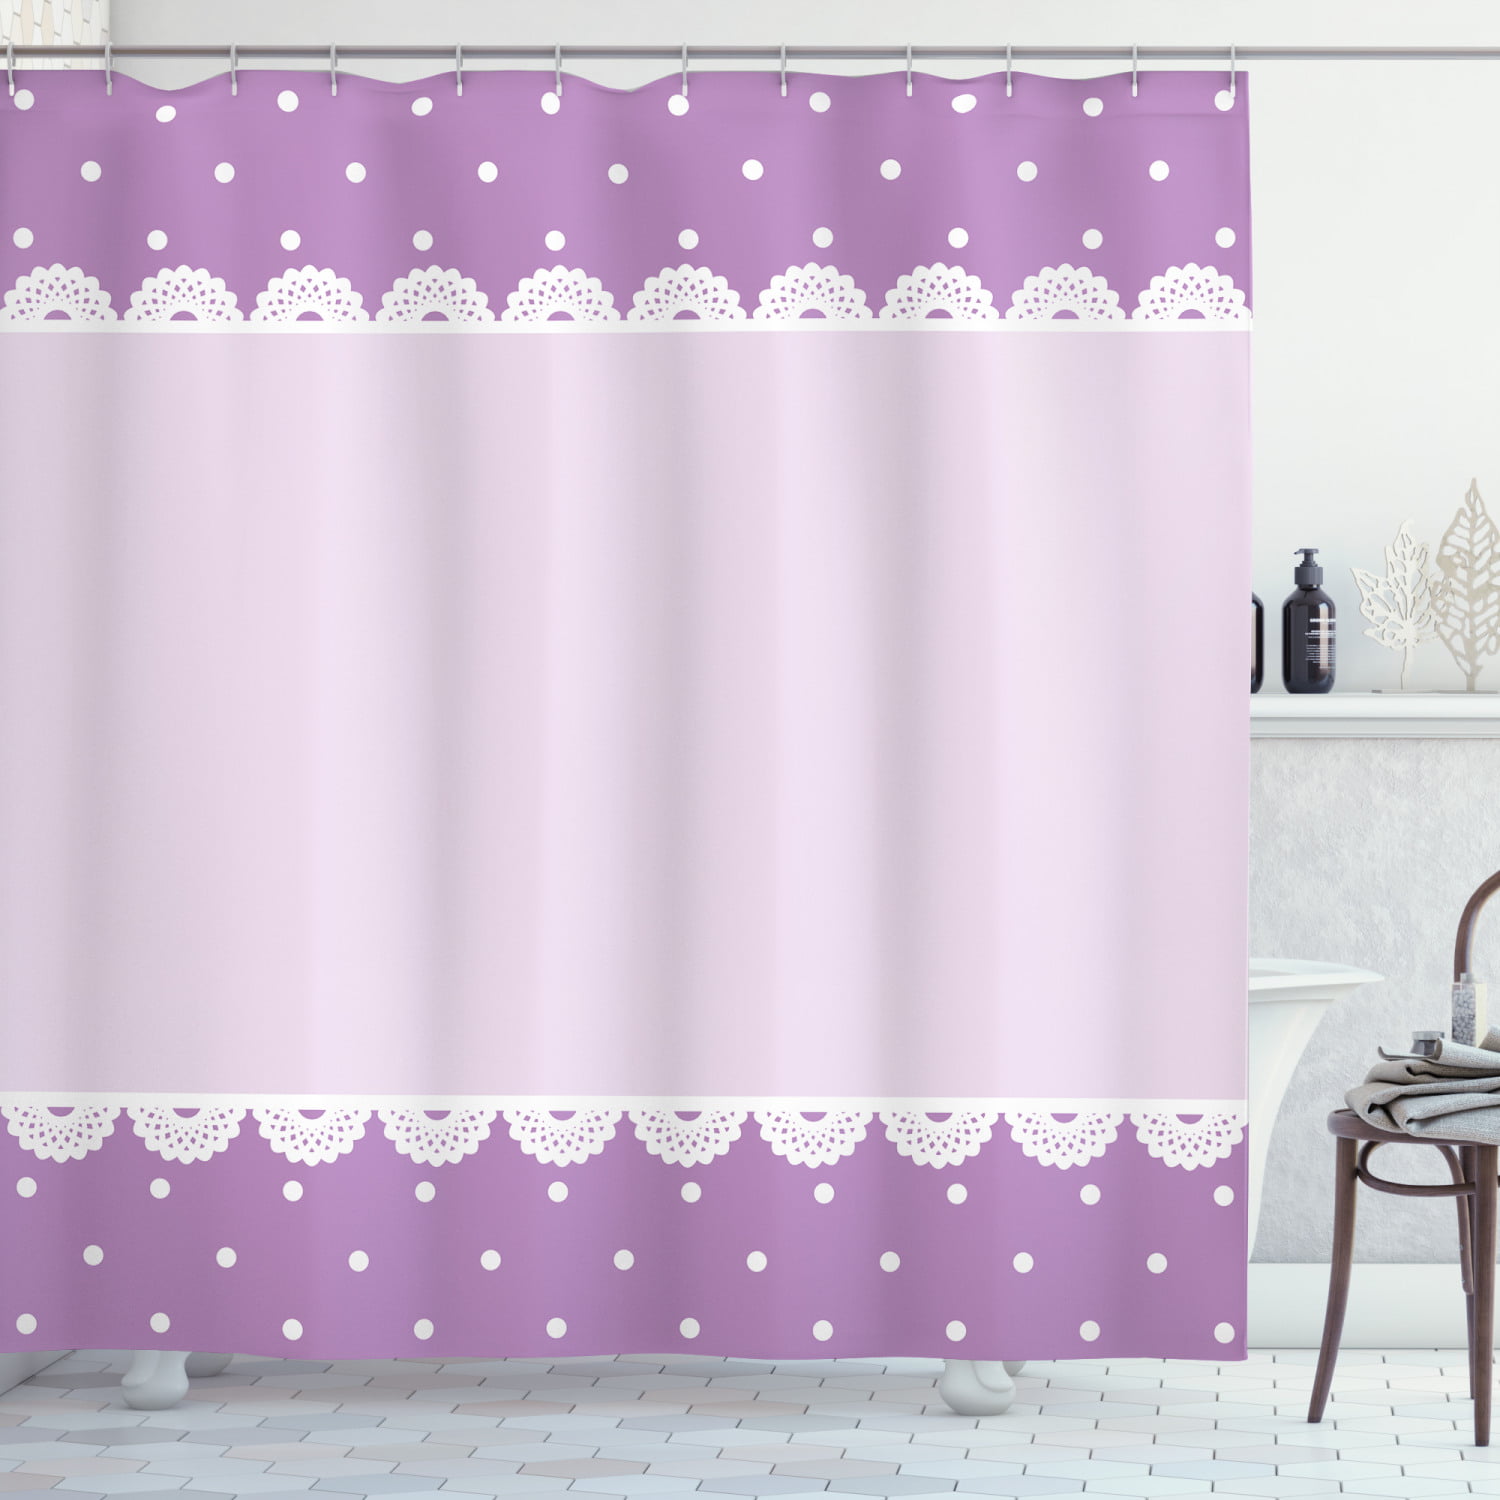 Mauve Shower Curtain, Old Fashioned Ornate Lace Pattern with Classical  Polka Dots Background Image, Fabric Bathroom Set with Hooks, 69W X 84L  Inches 